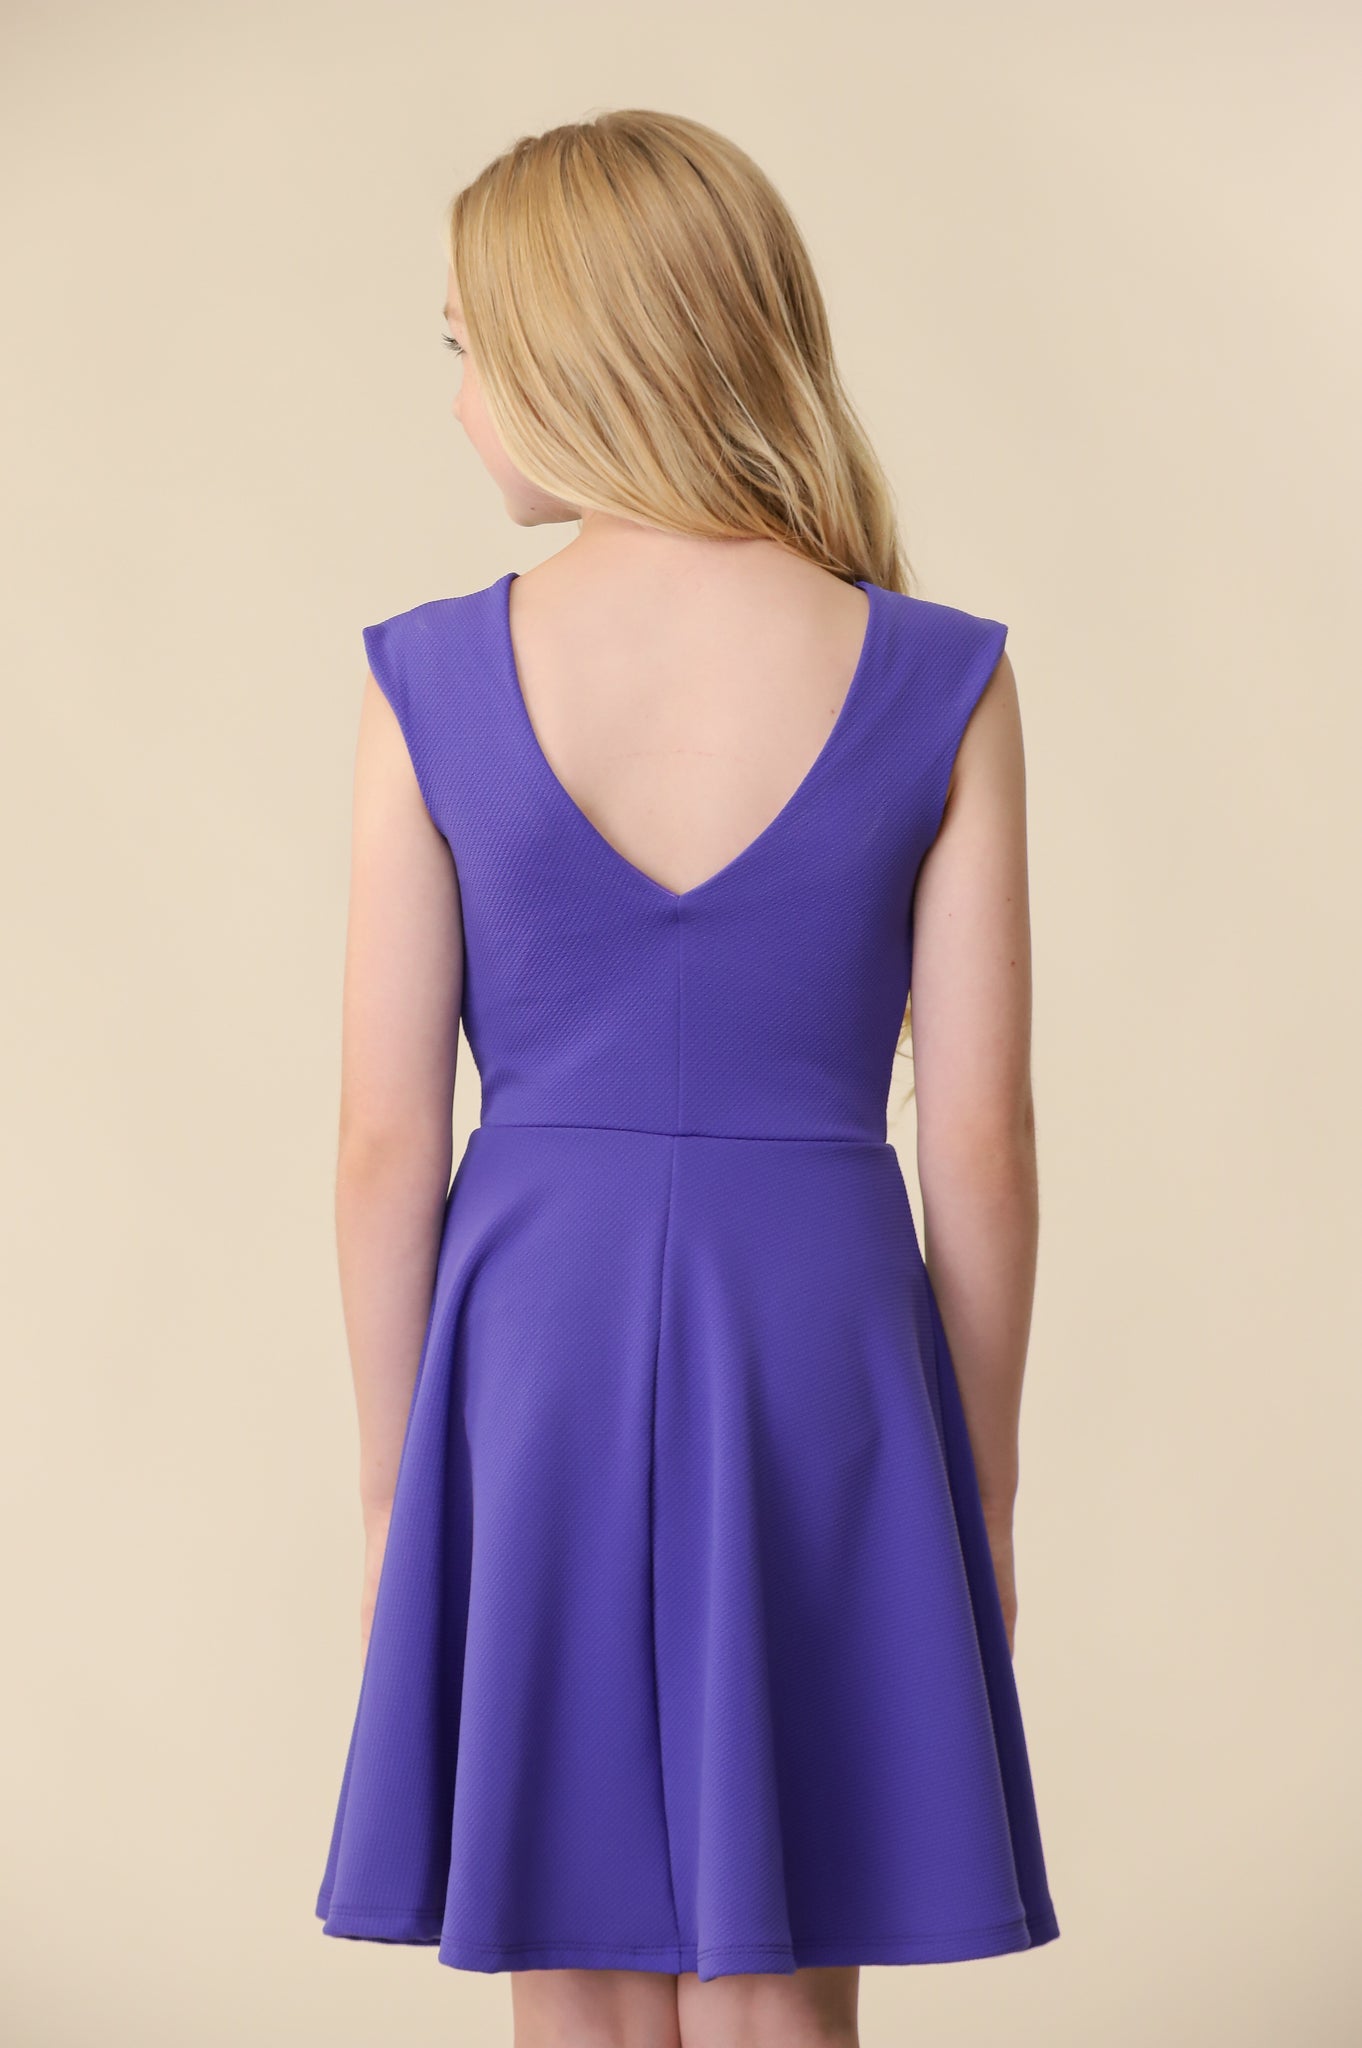 The cap sleeve textured fit and flare dress is shown in royal blue with high neck line, shoulder coverage and lower v-back detailing for a chic and sophisticated look. This dress can be worn to a more coservative special occasion event like cotillion, graduation, or religious service like a bat mitzvah service or church ceremony.